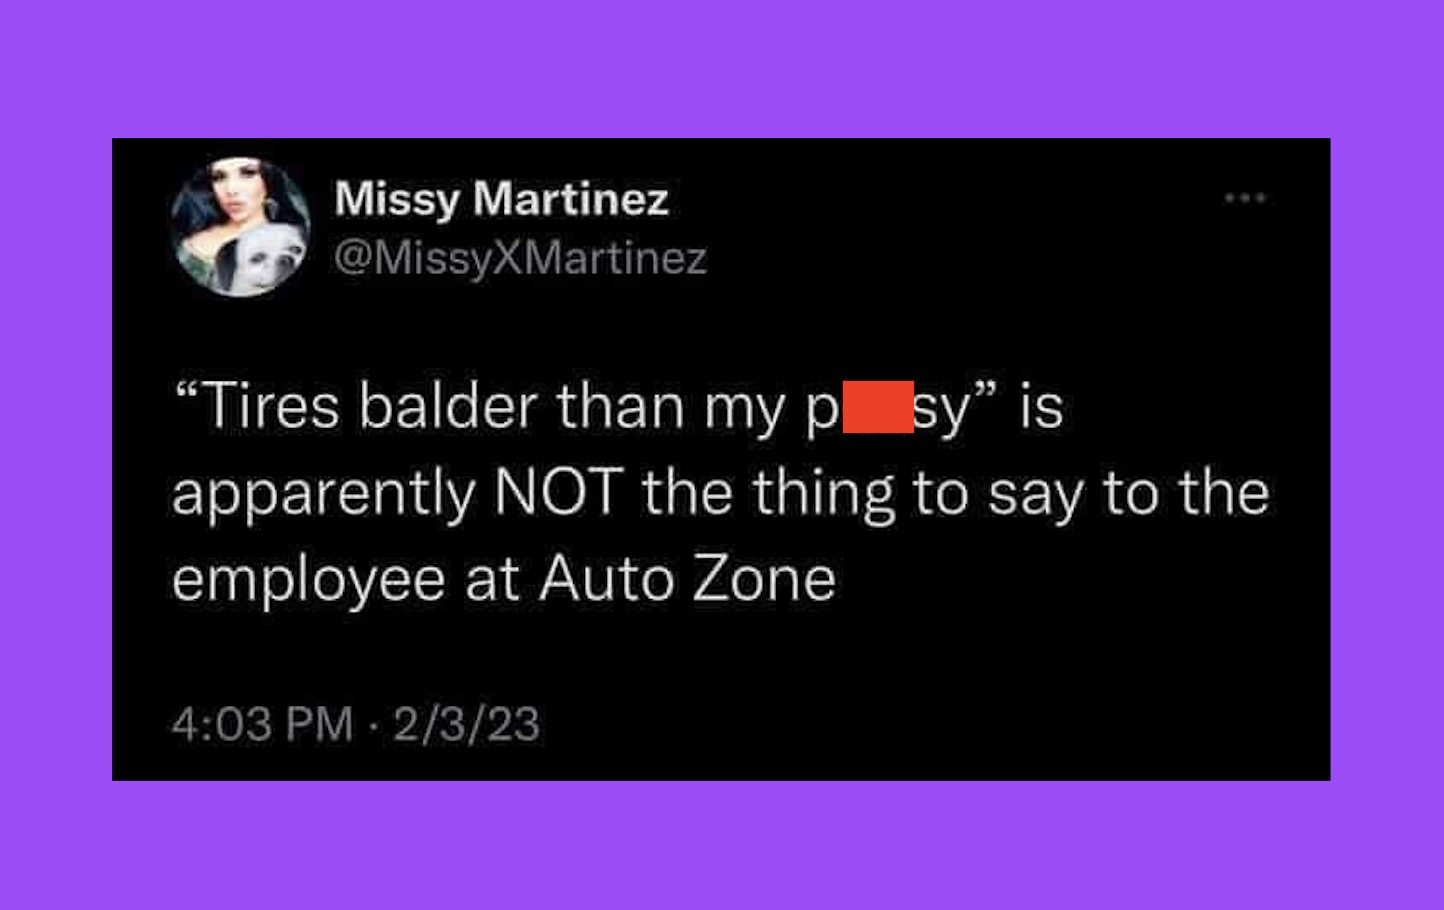 "Tires balder than my p sy" is apparently NOT the thing to say to the employee at Auto Zone